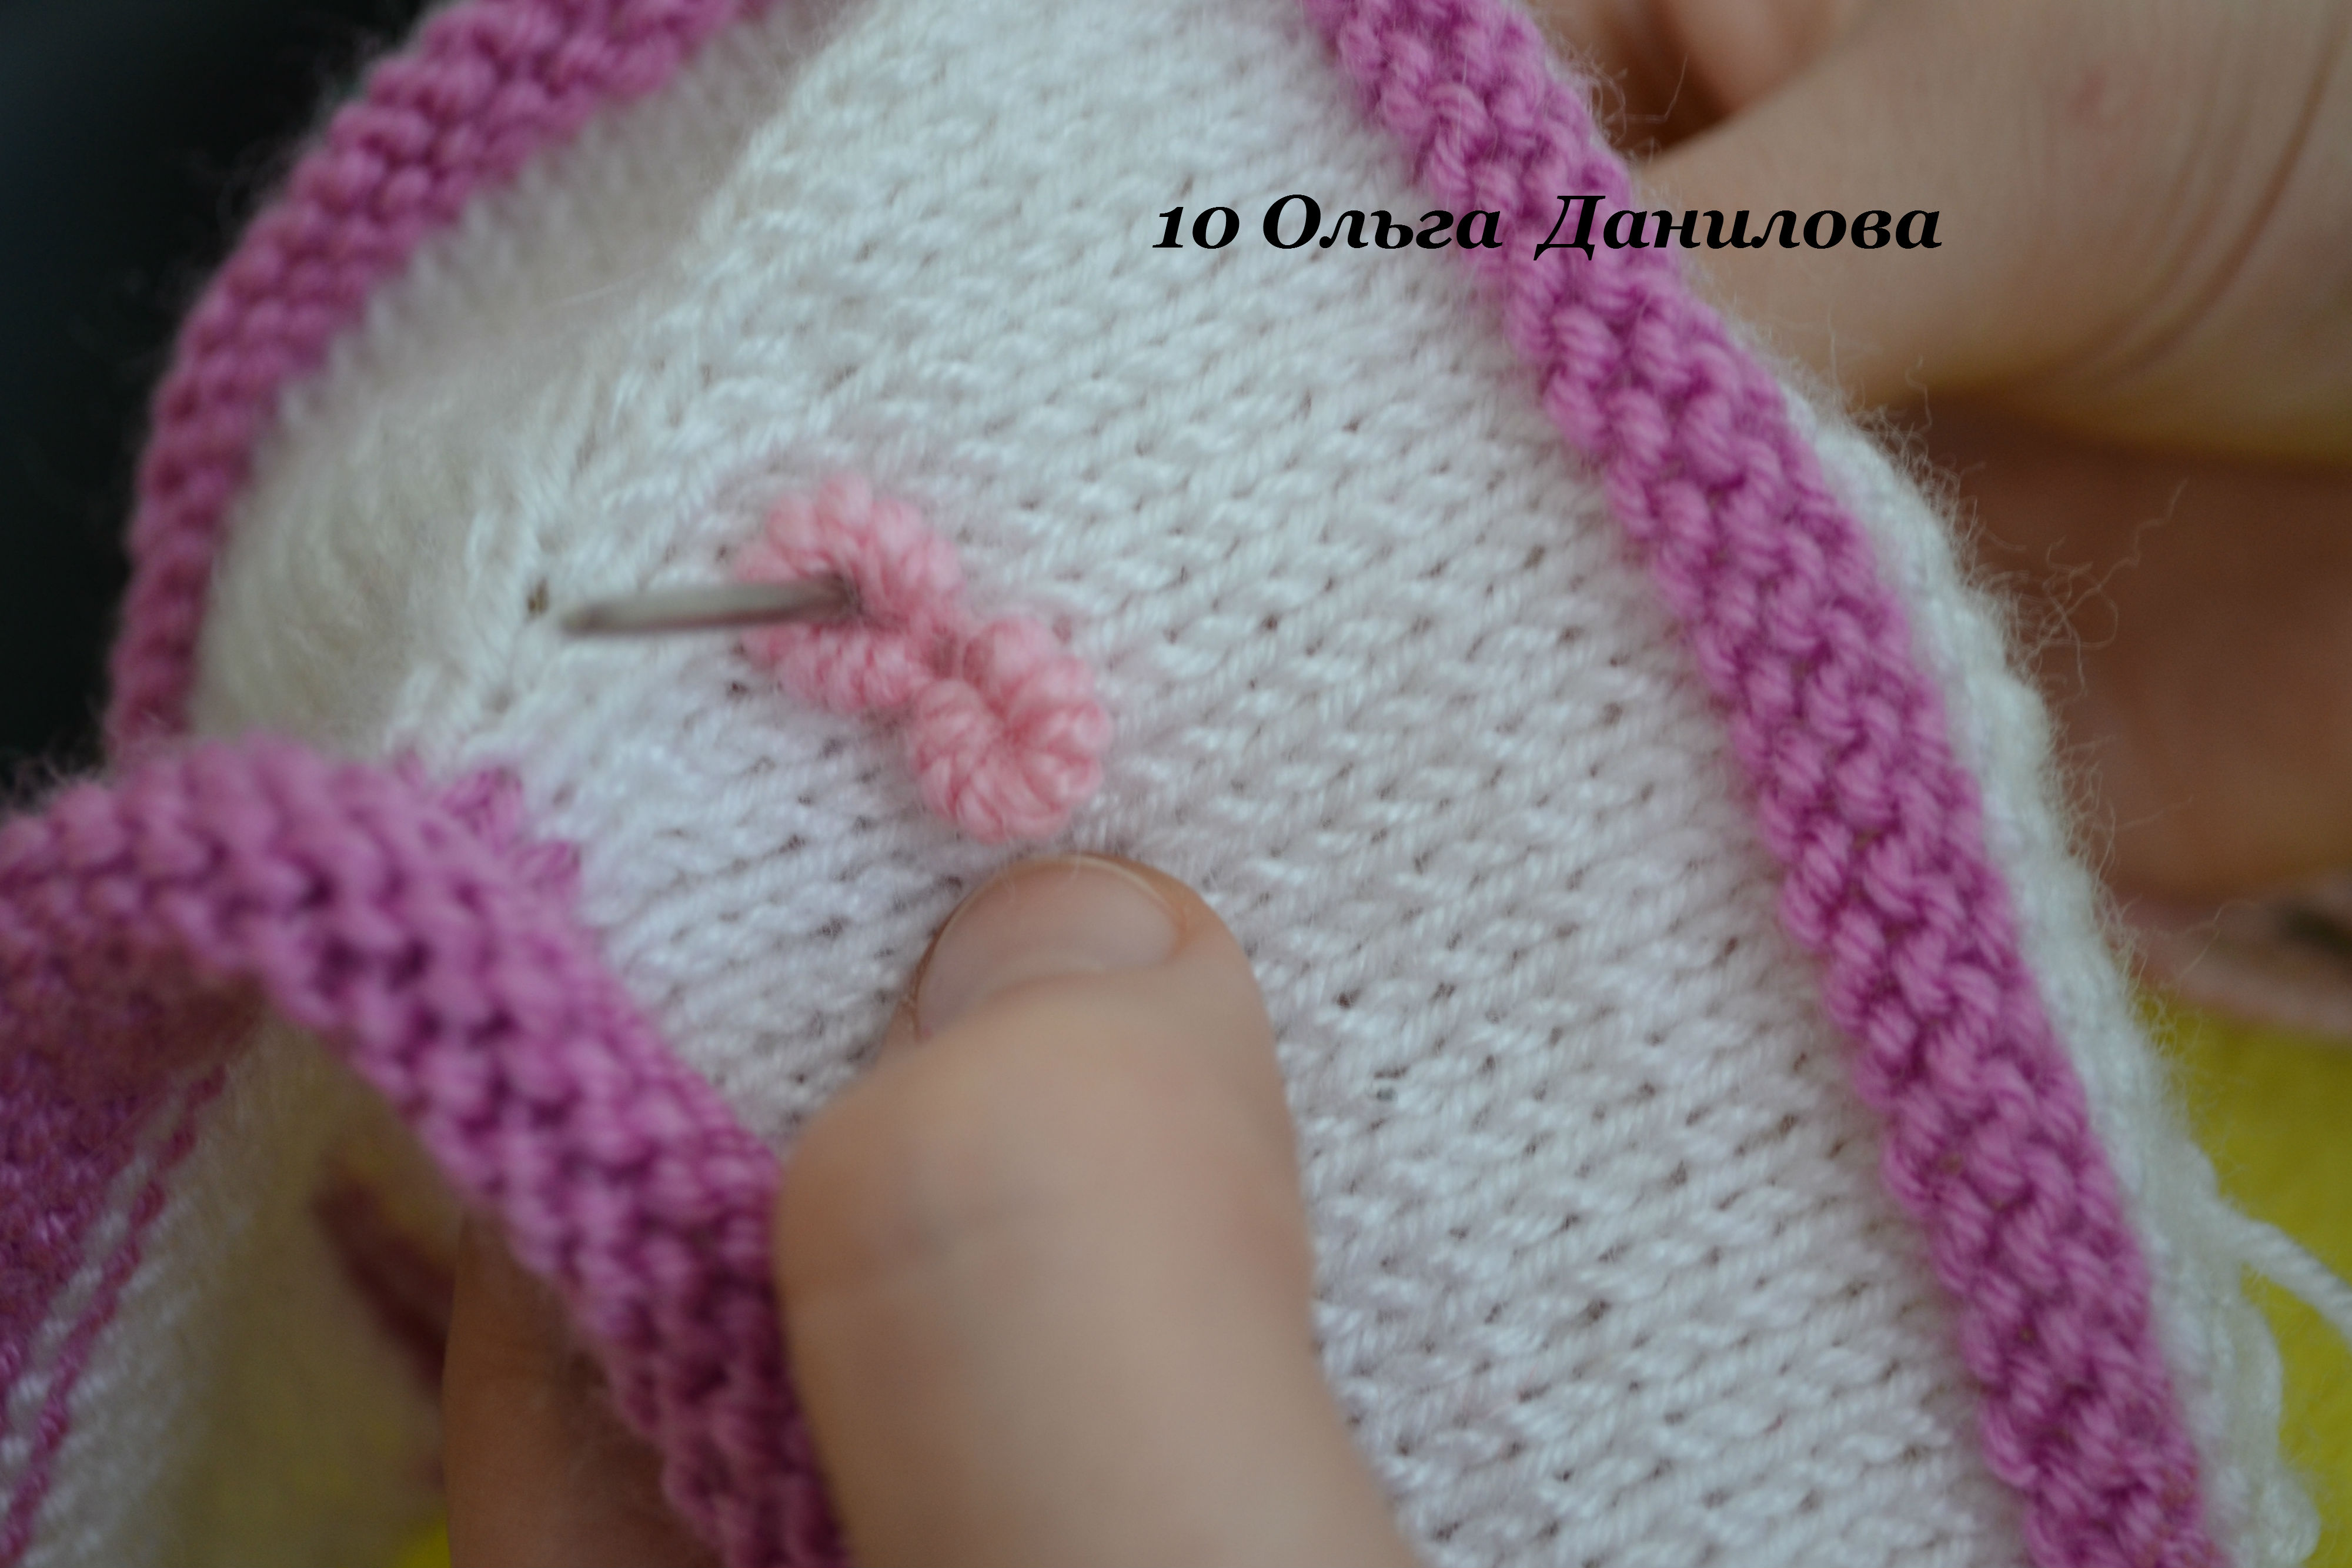 How-to-Make-Pretty-Knitted-Baby-Booties-12.jpg